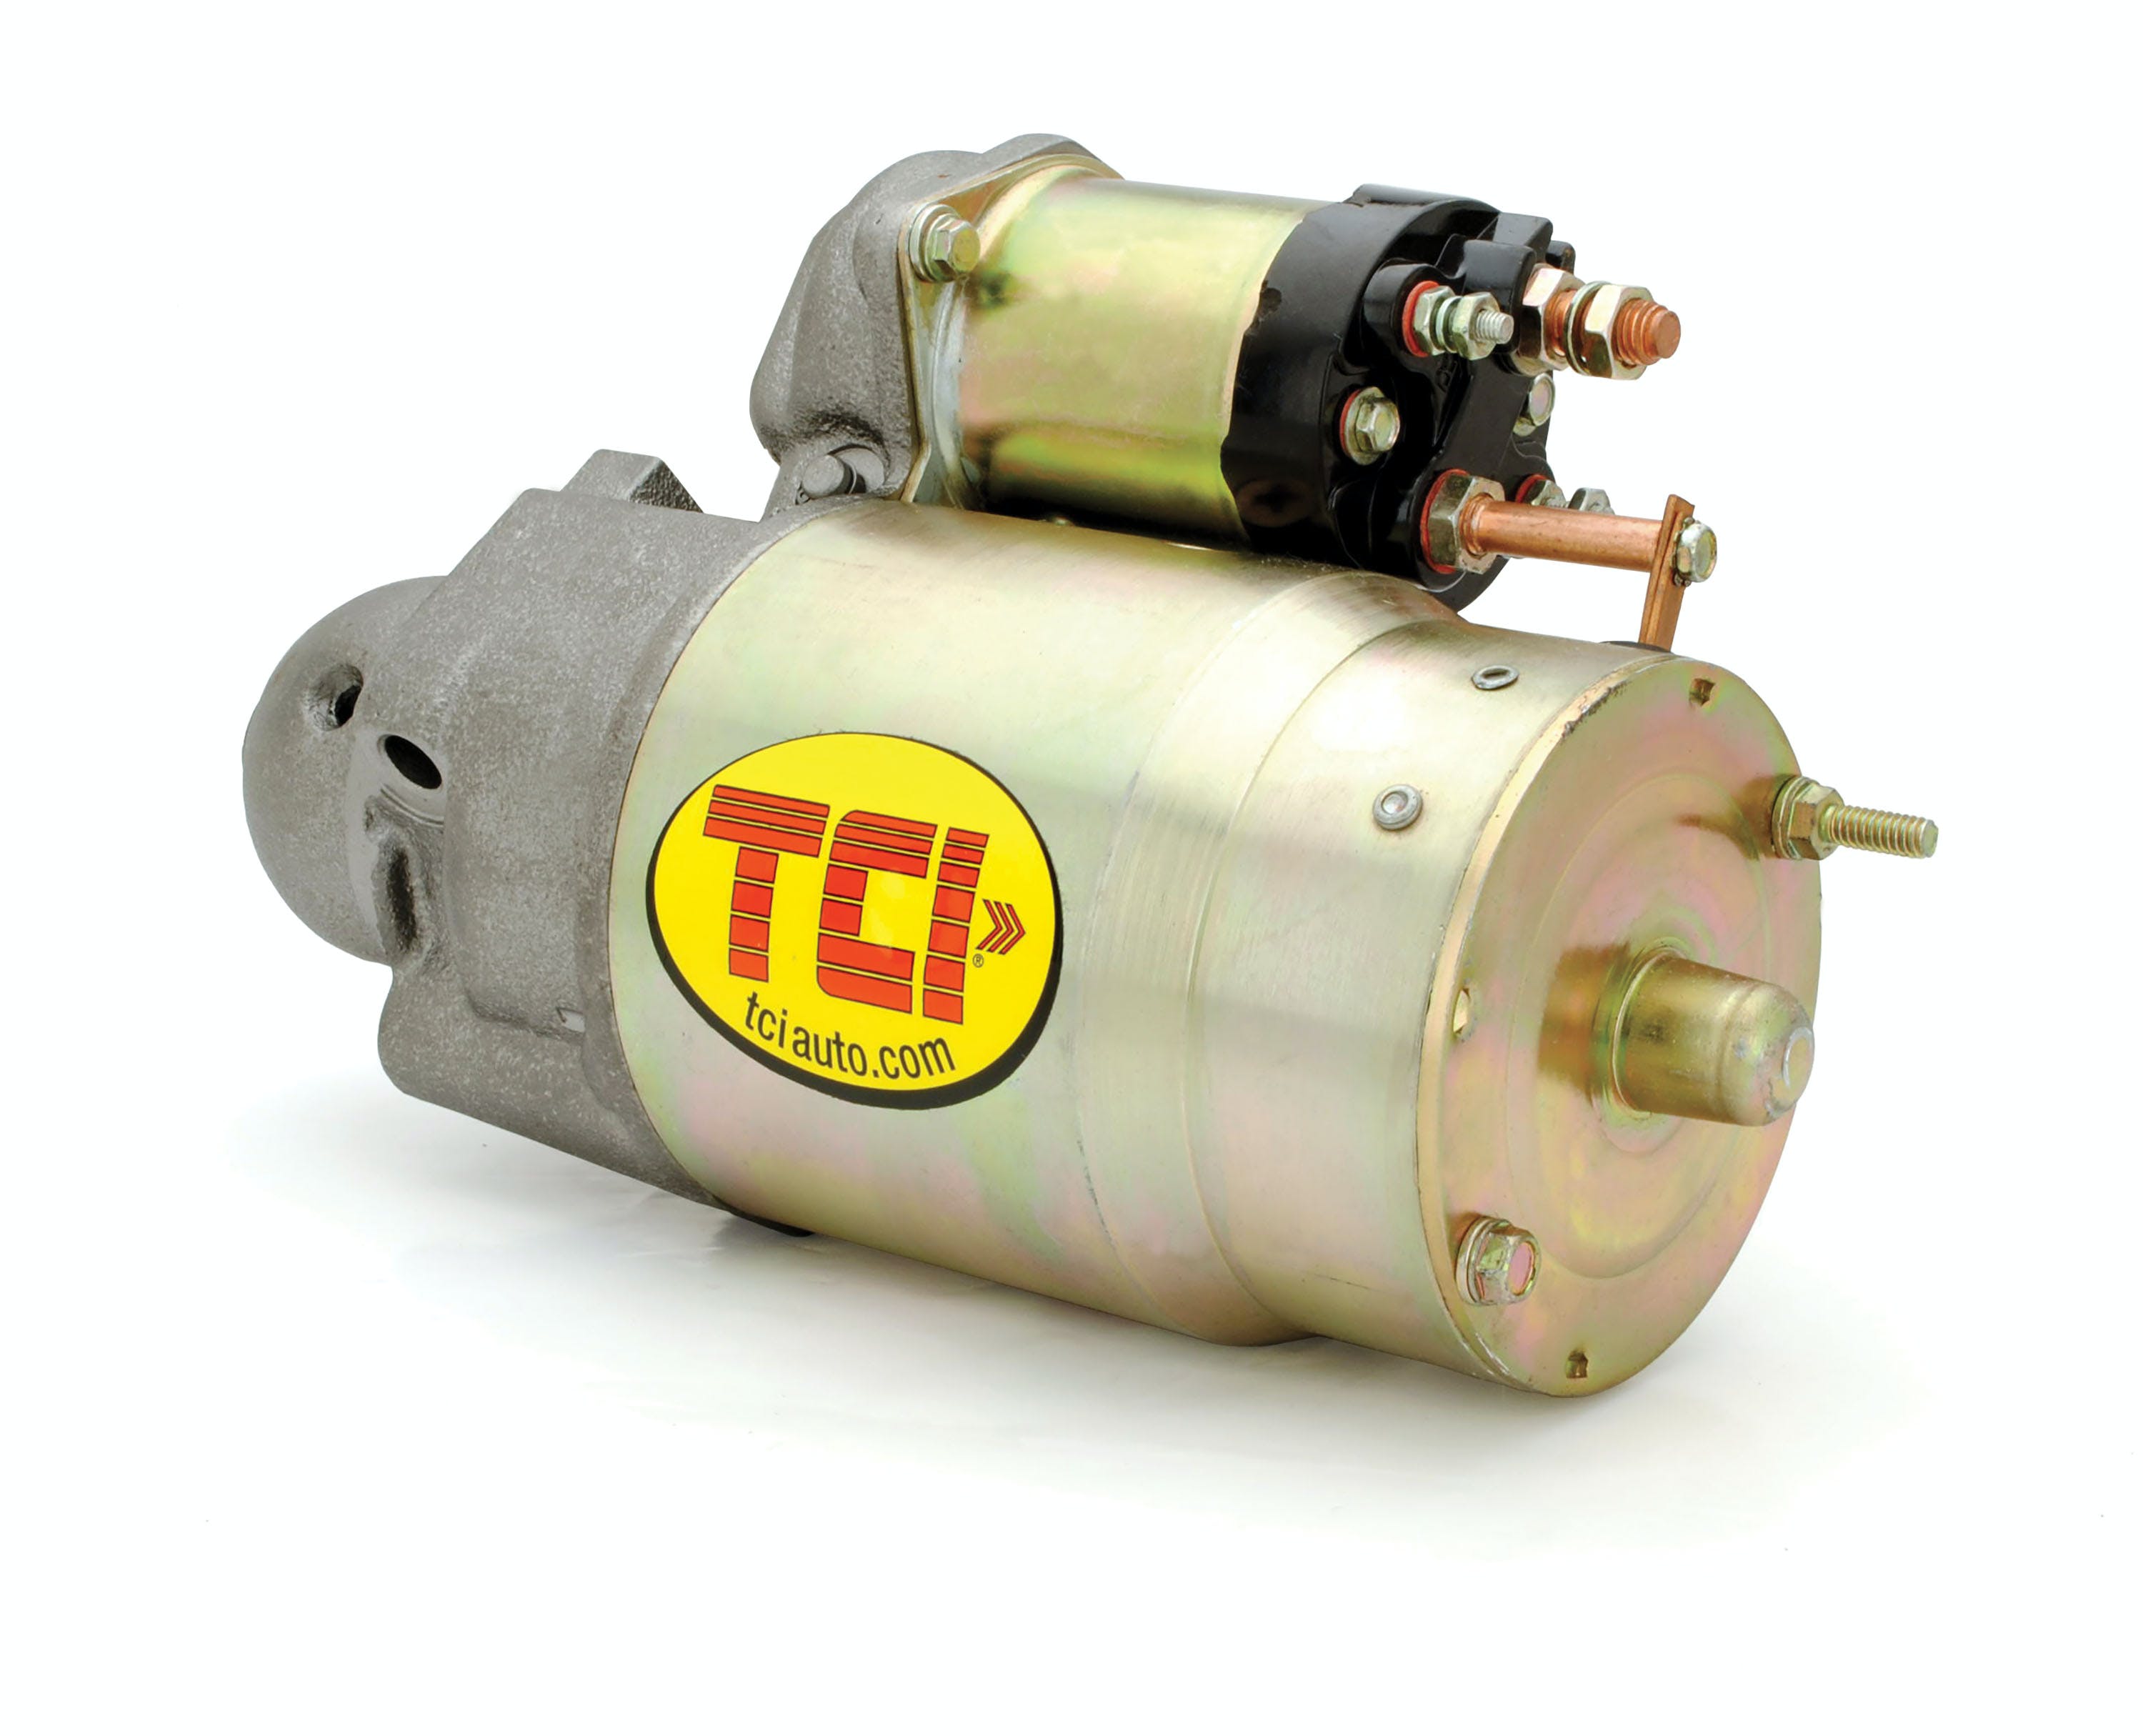 TCI Automotive 356000 High Torque Starter w/ Cast Iron Nose for Chevrolet Small and Big Block